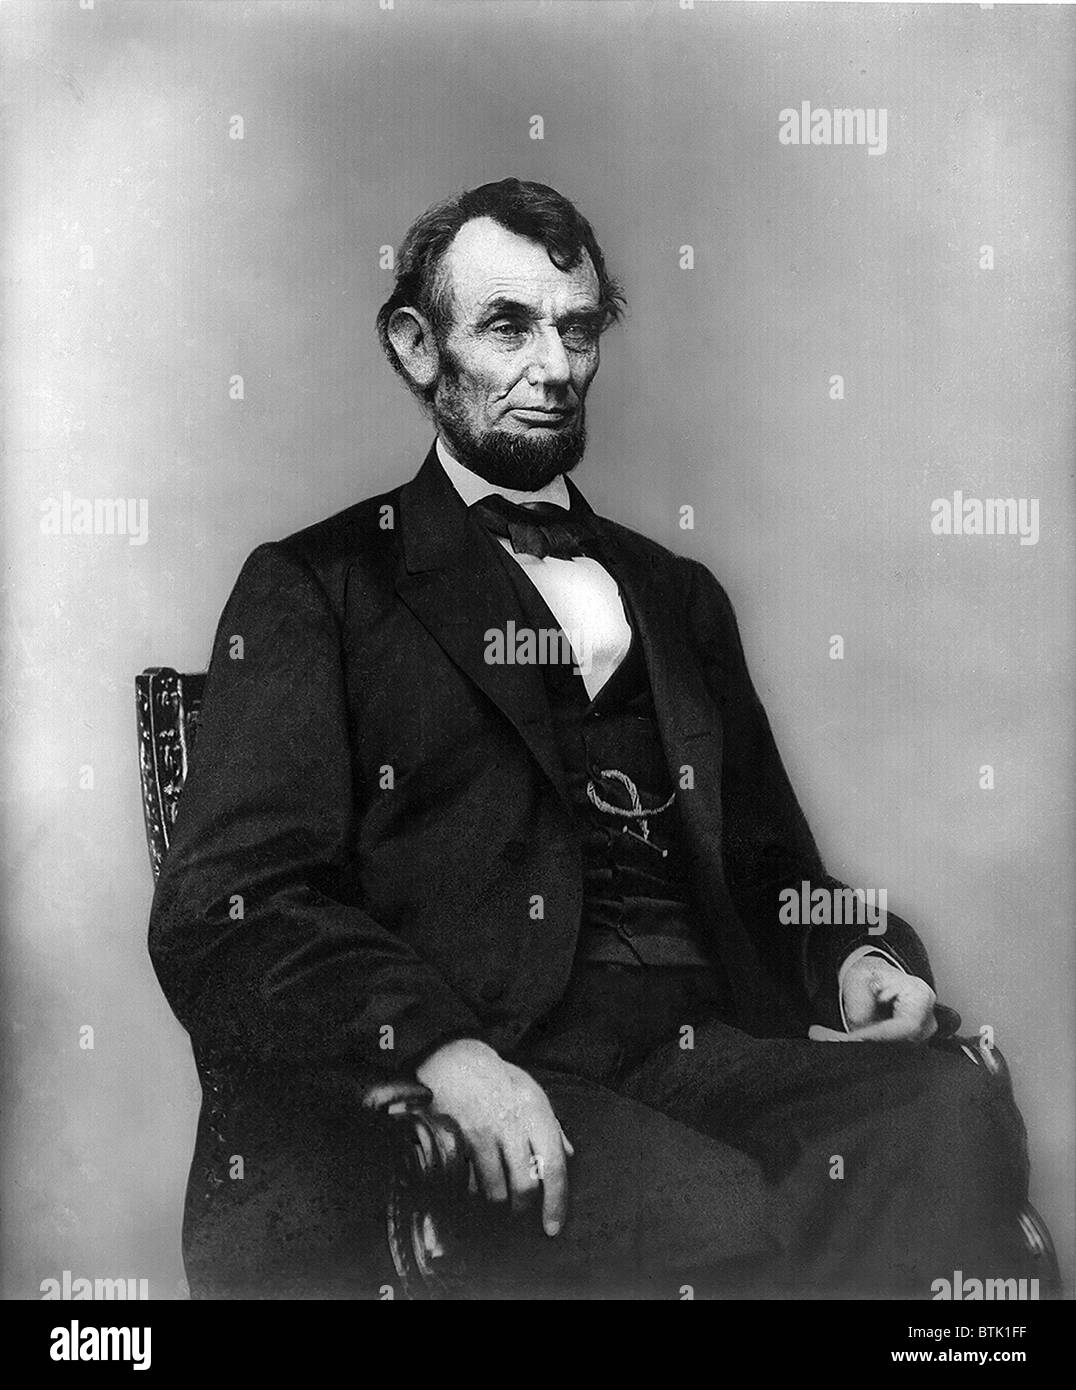 *6* ABRAHAM LINCOLN IMAGE ON OPAQUE WHITE with BLACK IMAGE & PIPS 16mm DICE 